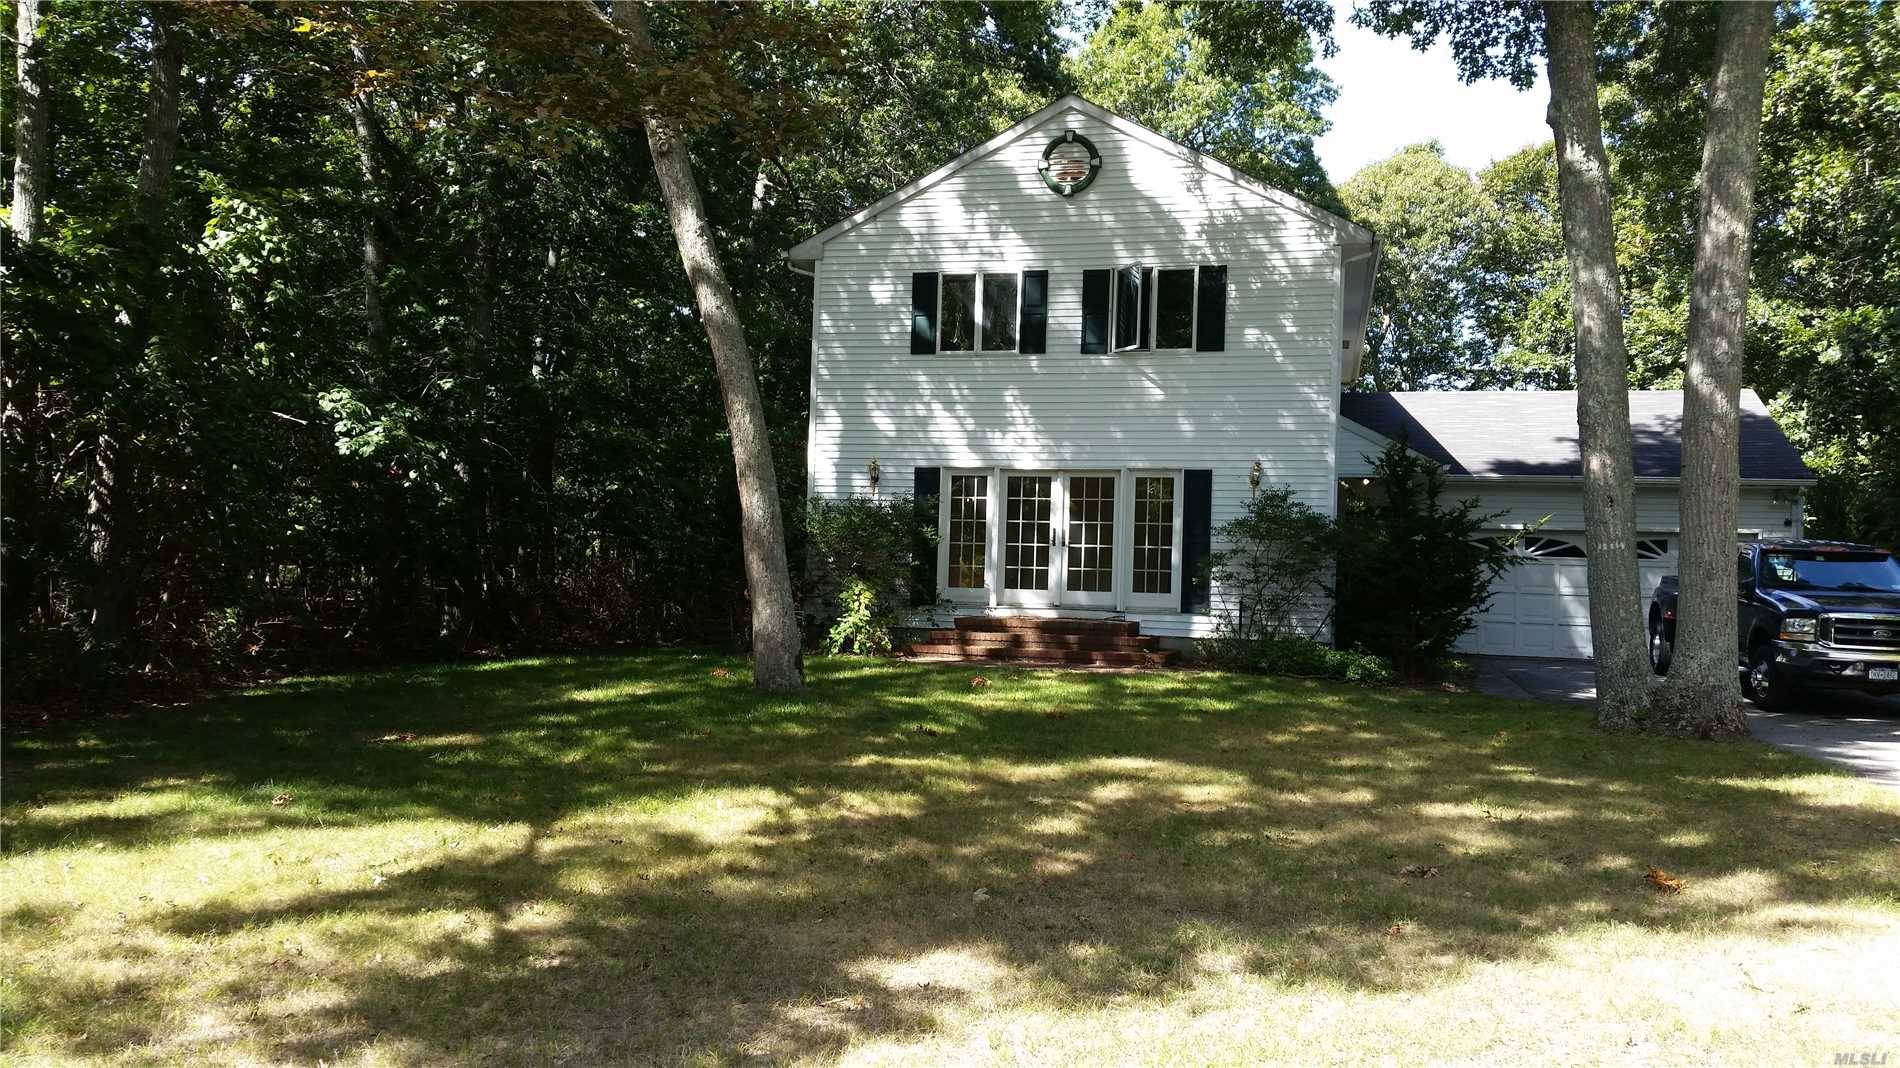 Enjoy Your Summers Or Live Year Round In This Bright, Airy 2 Story Home On A Wooded 1/2 Acre Lot In A Highly Desirable East Marion Community.